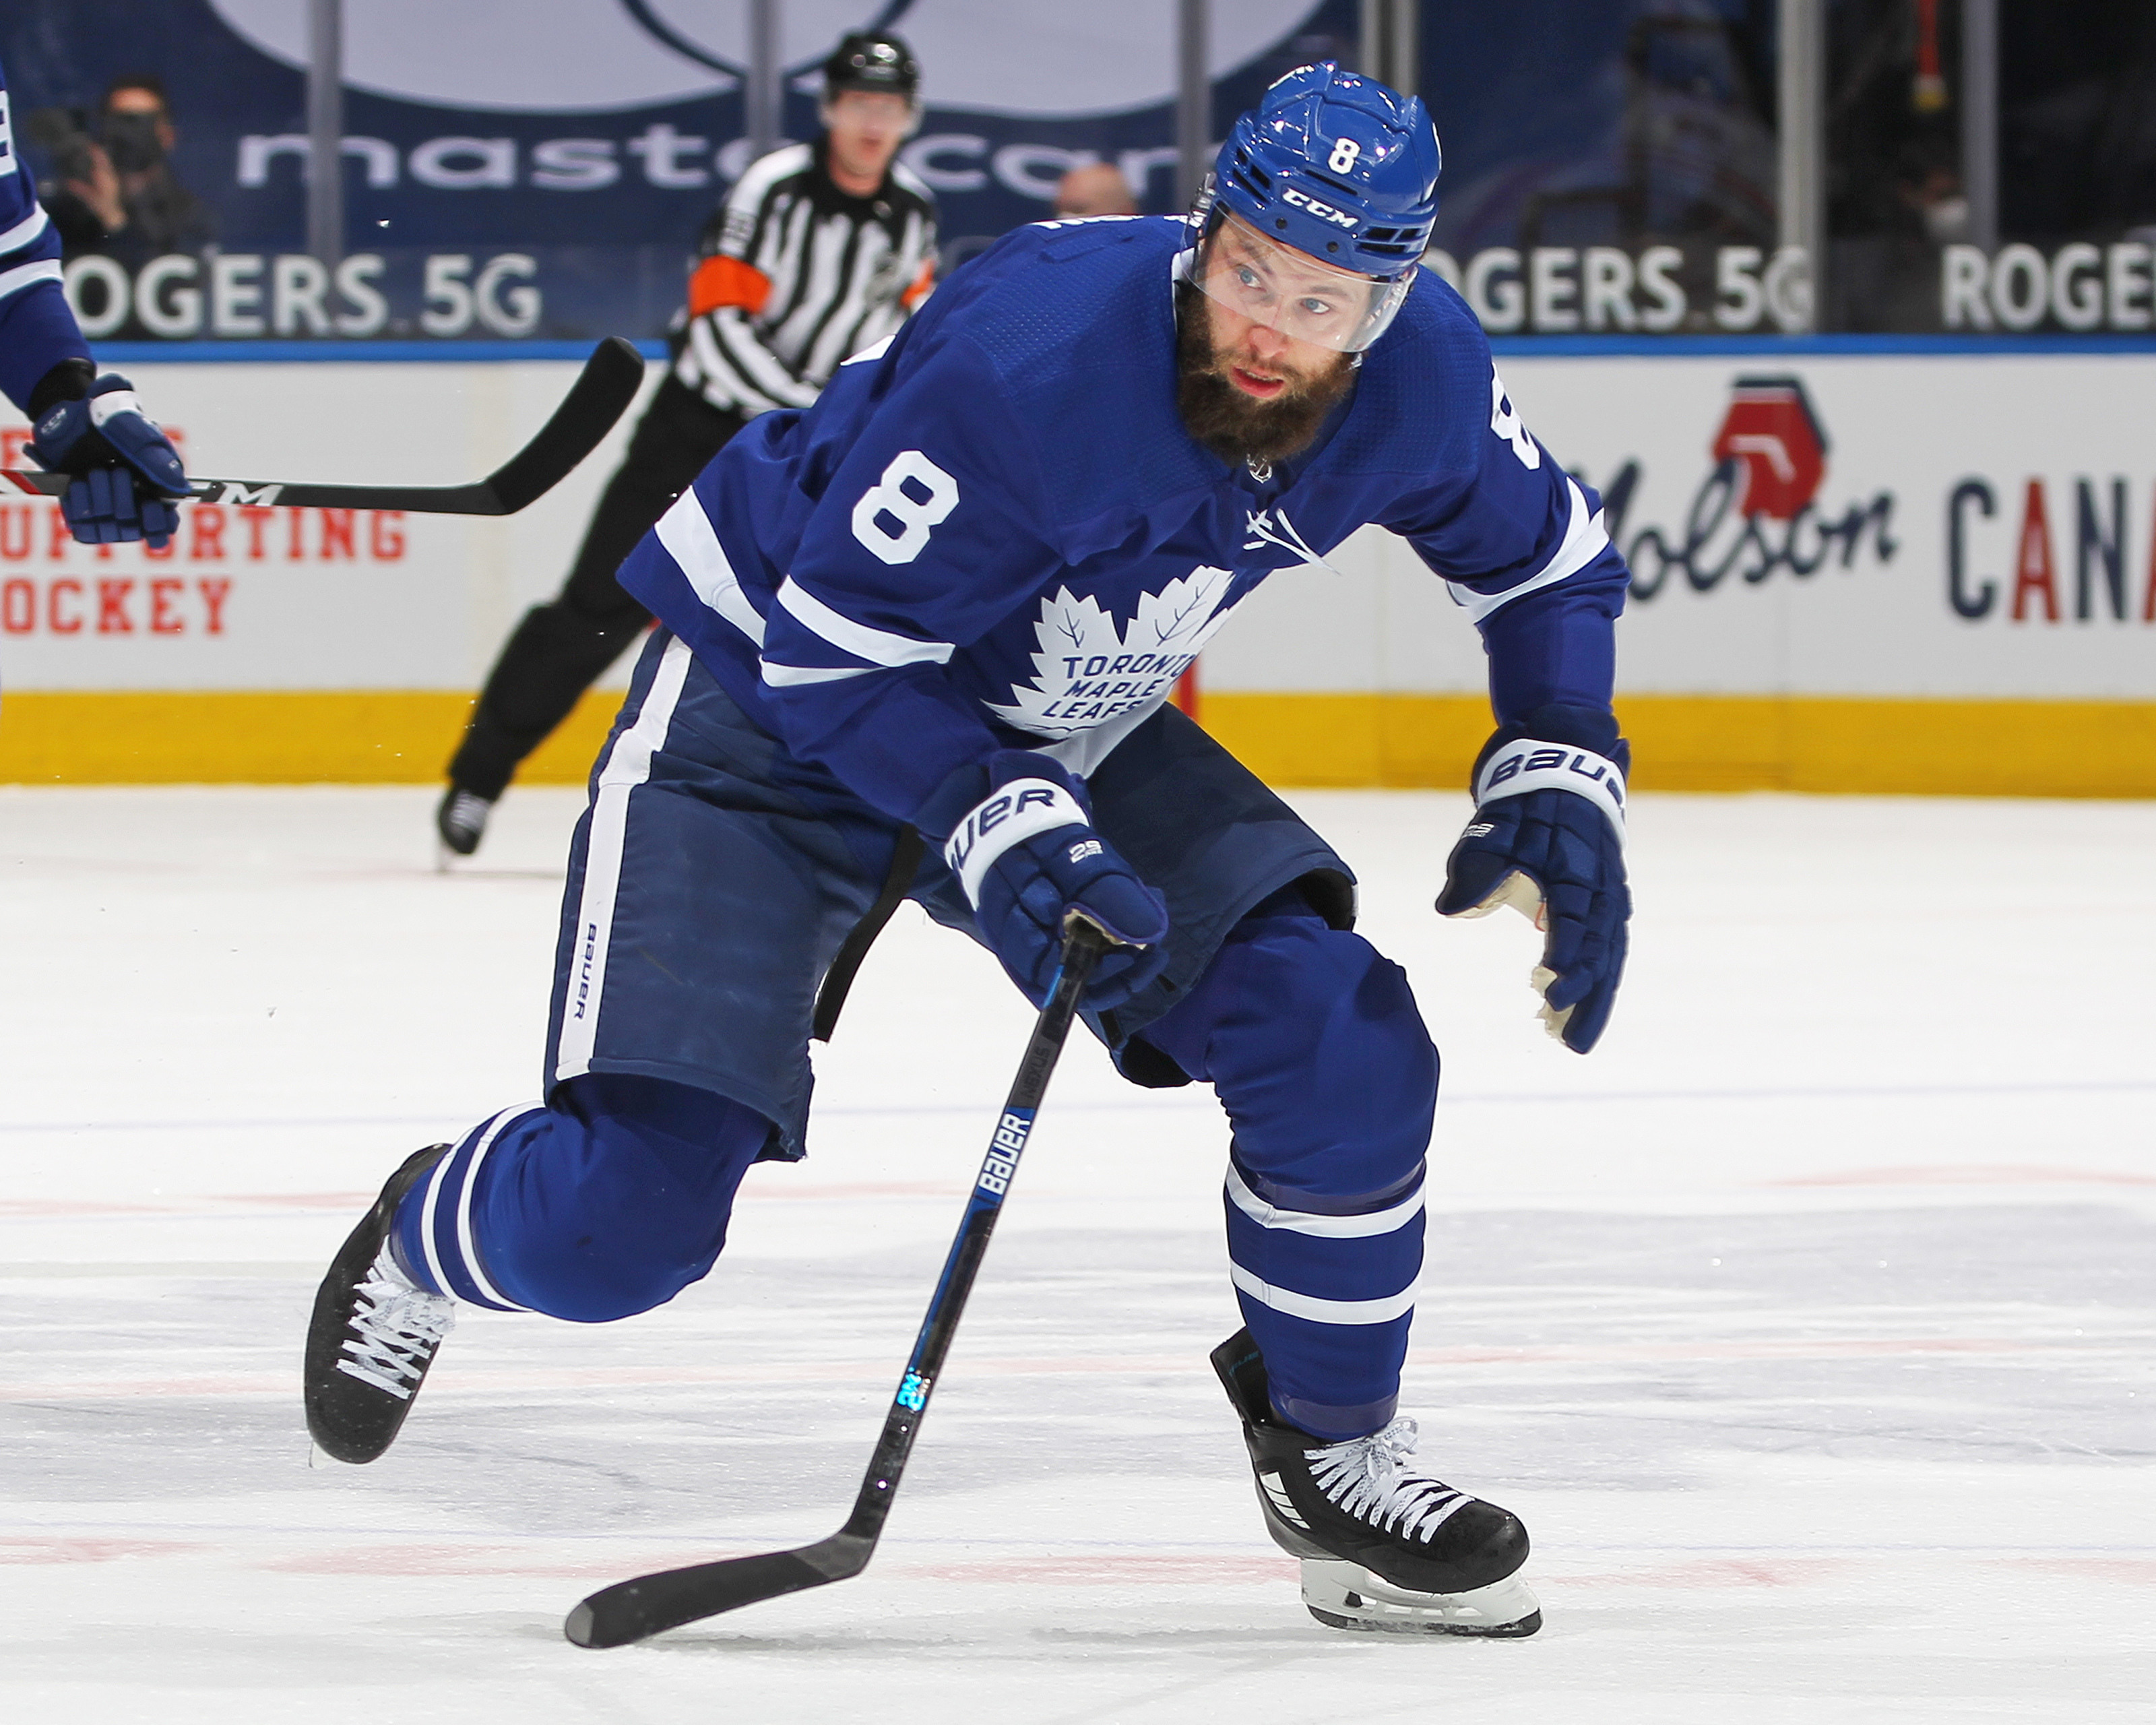 Among the Maple Leafs new roster, only Muzzin has won a Stanley